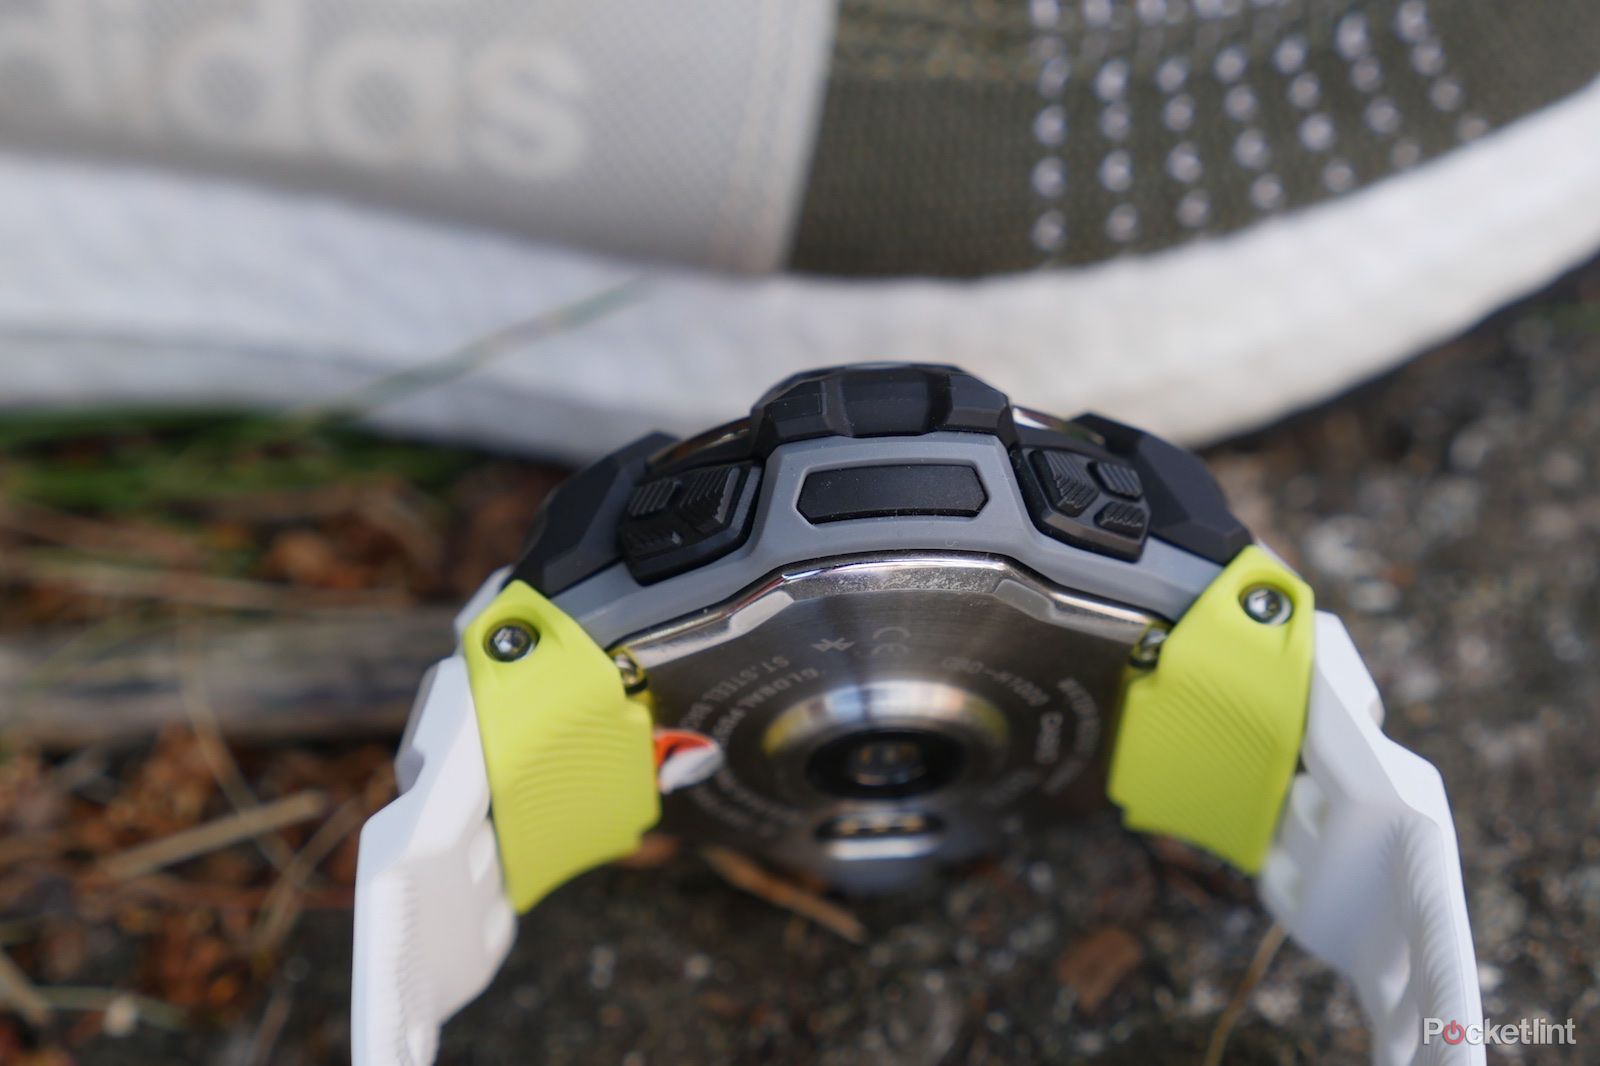 Casio G-Shock GBD-H1000 review image 1